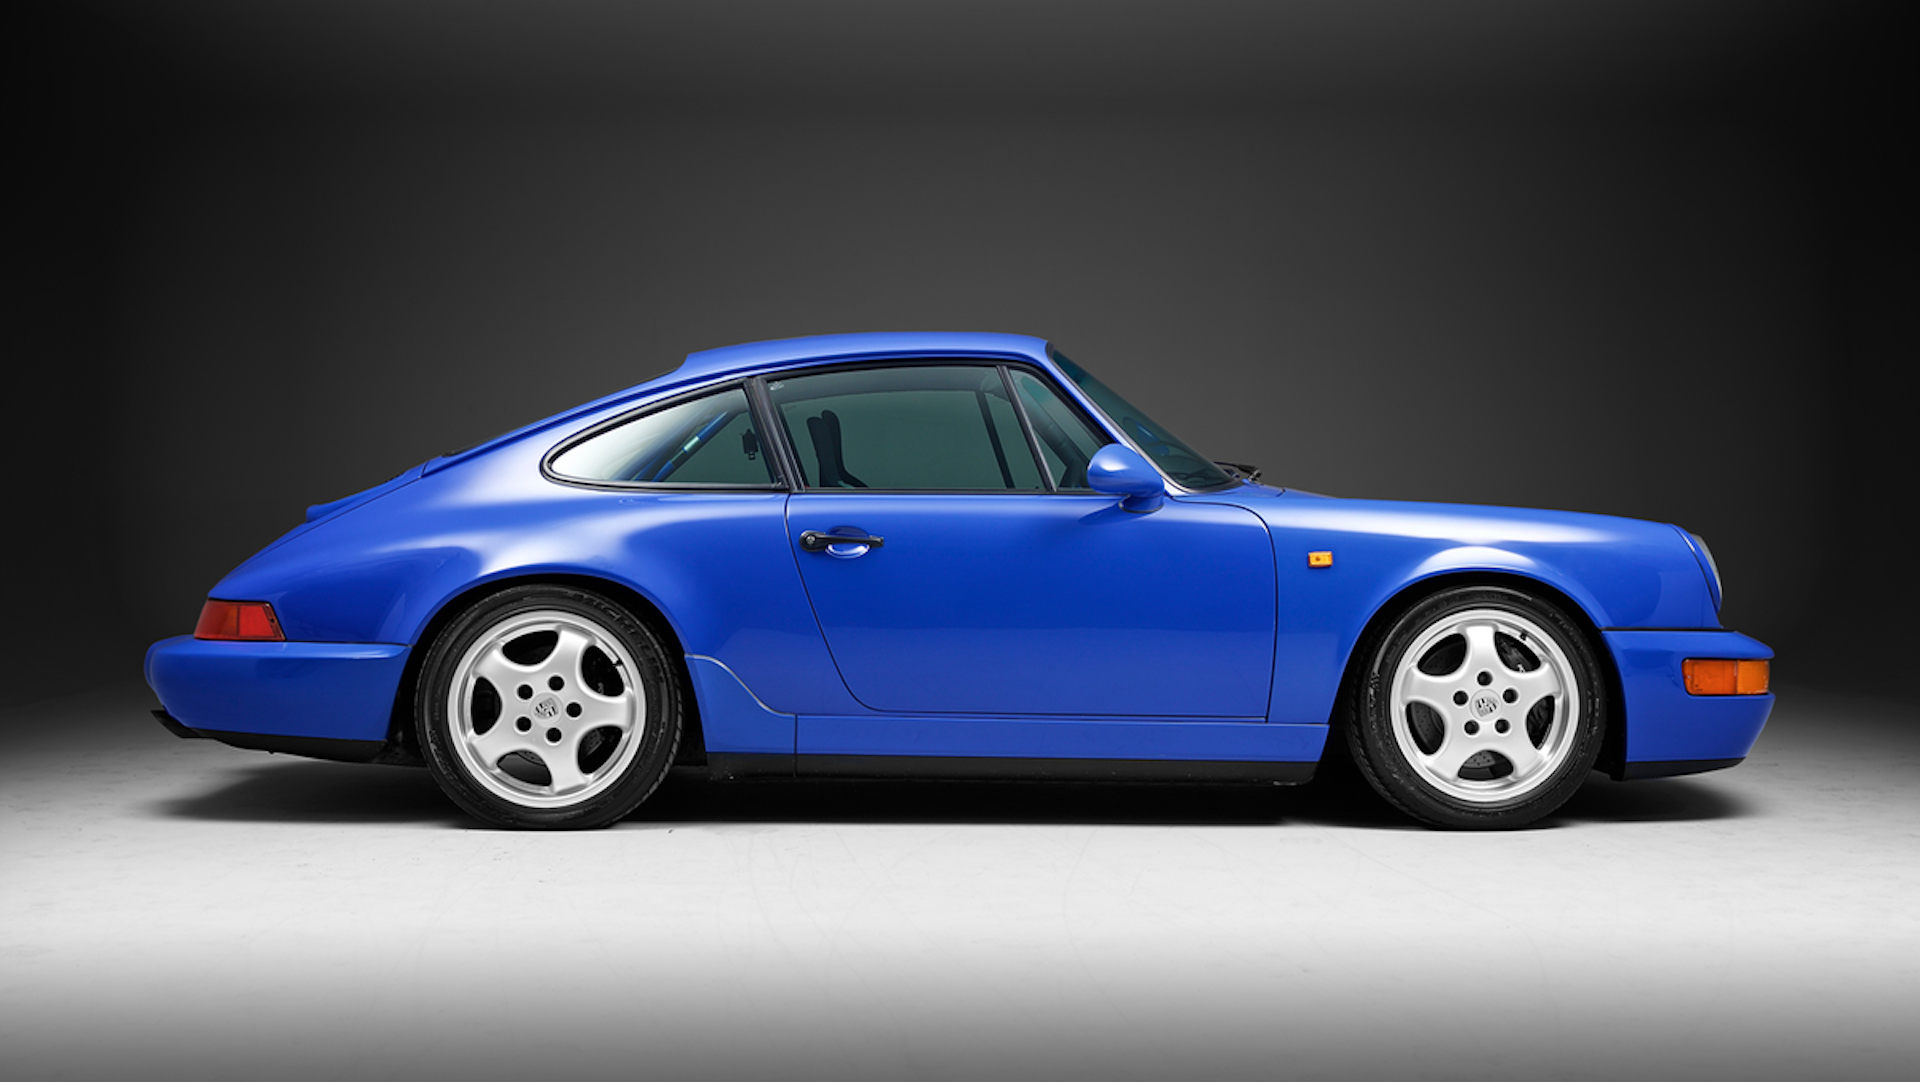 7 Choice Picks From This Year’s Best Porsche Auction